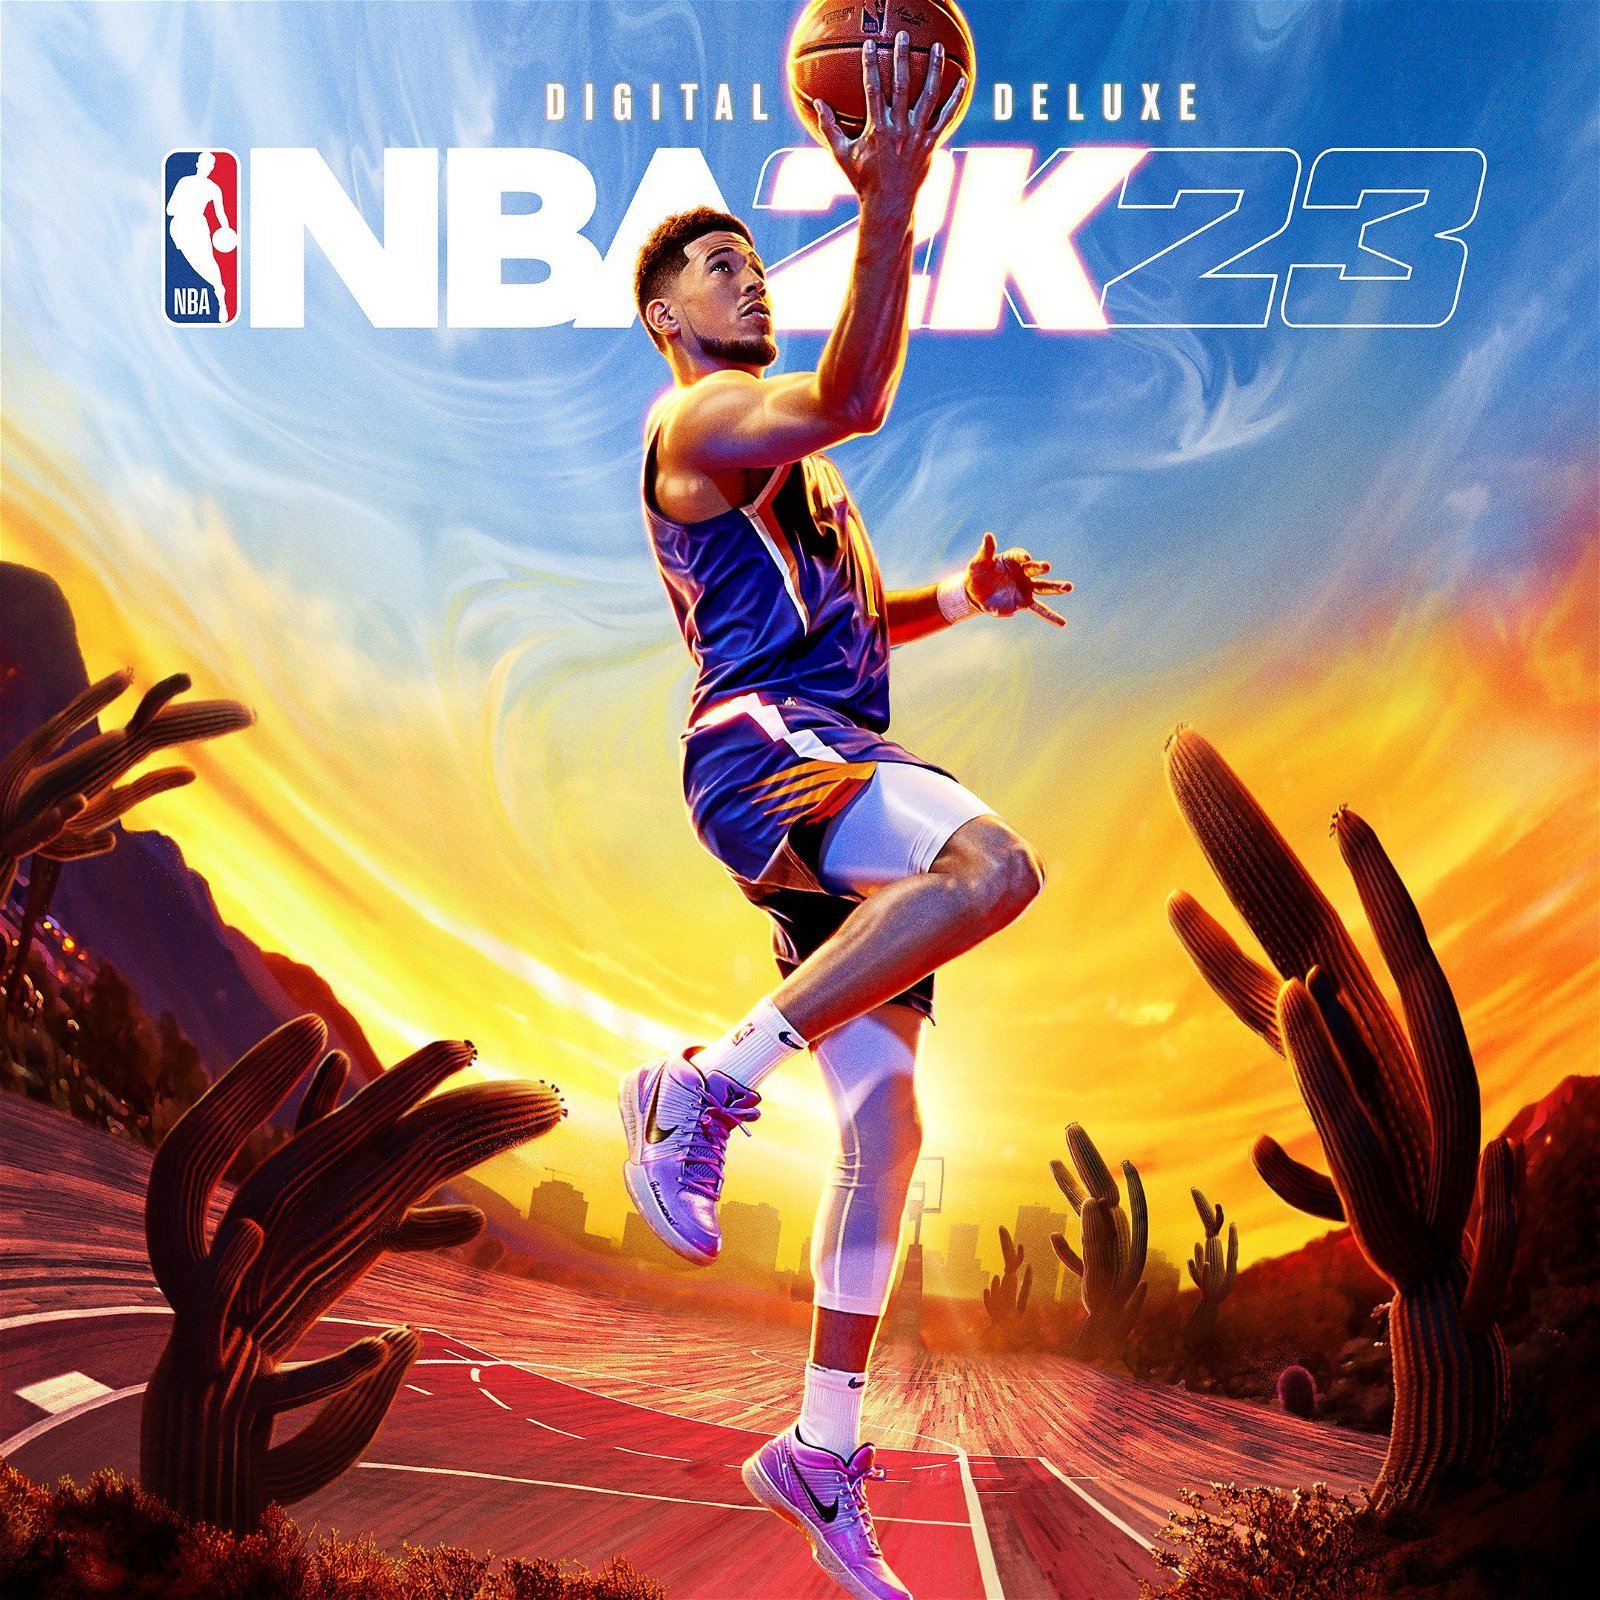 Image of NBA 2K23 Digital Deluxe Edition